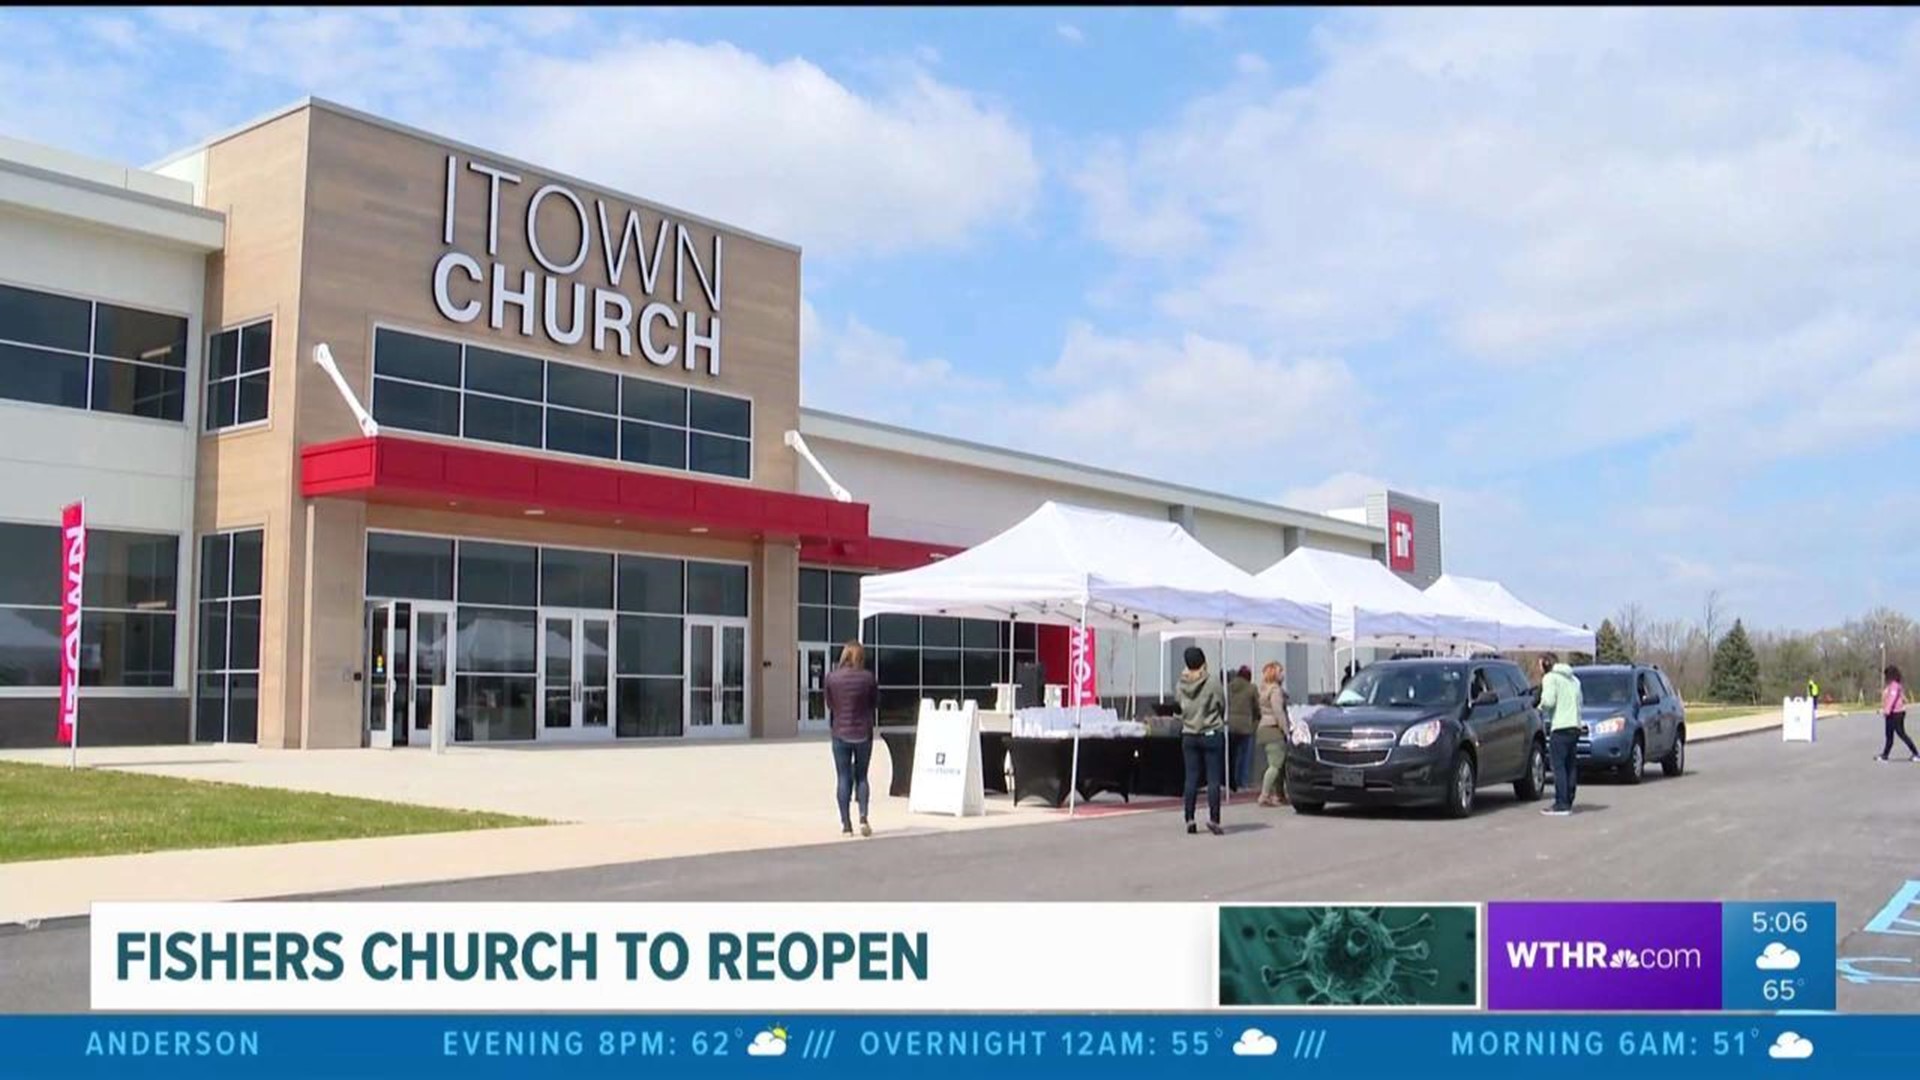 Fishers Church to Reopen